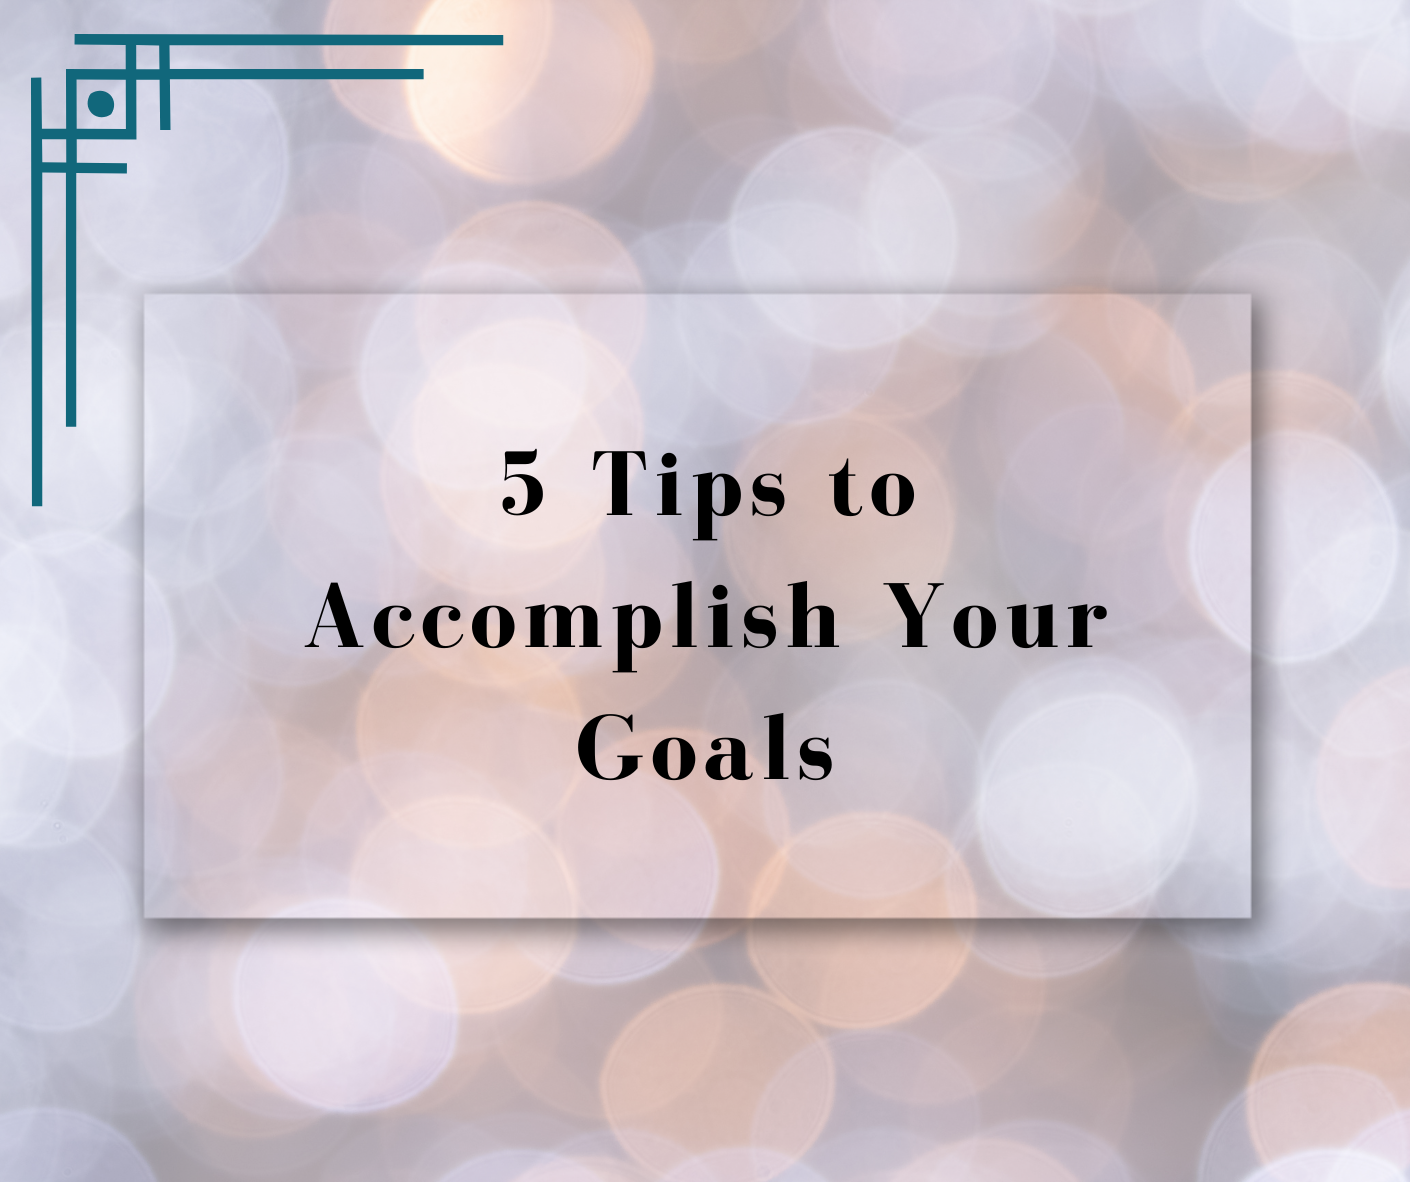 5 Tips to Accomplish Your Goals